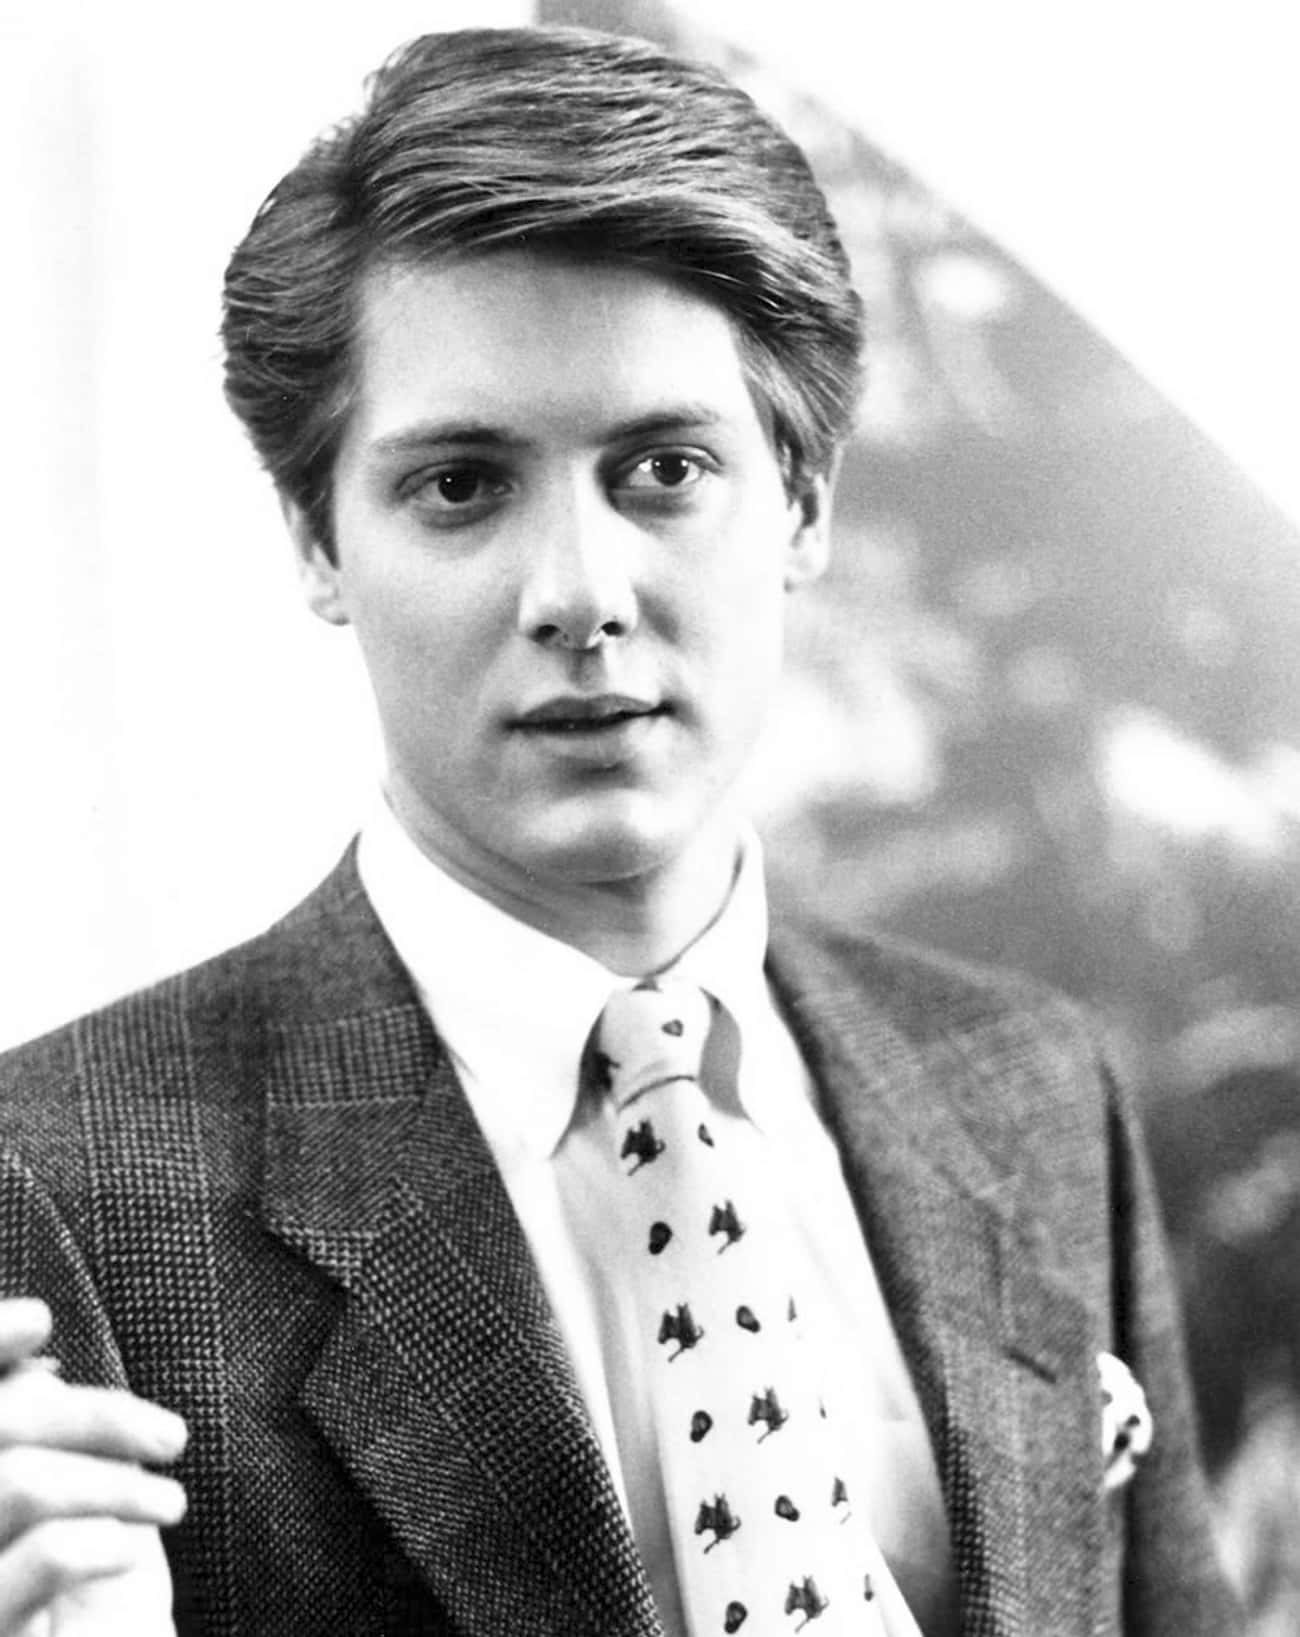 Young James Spader in Patterned Jacket and Tie